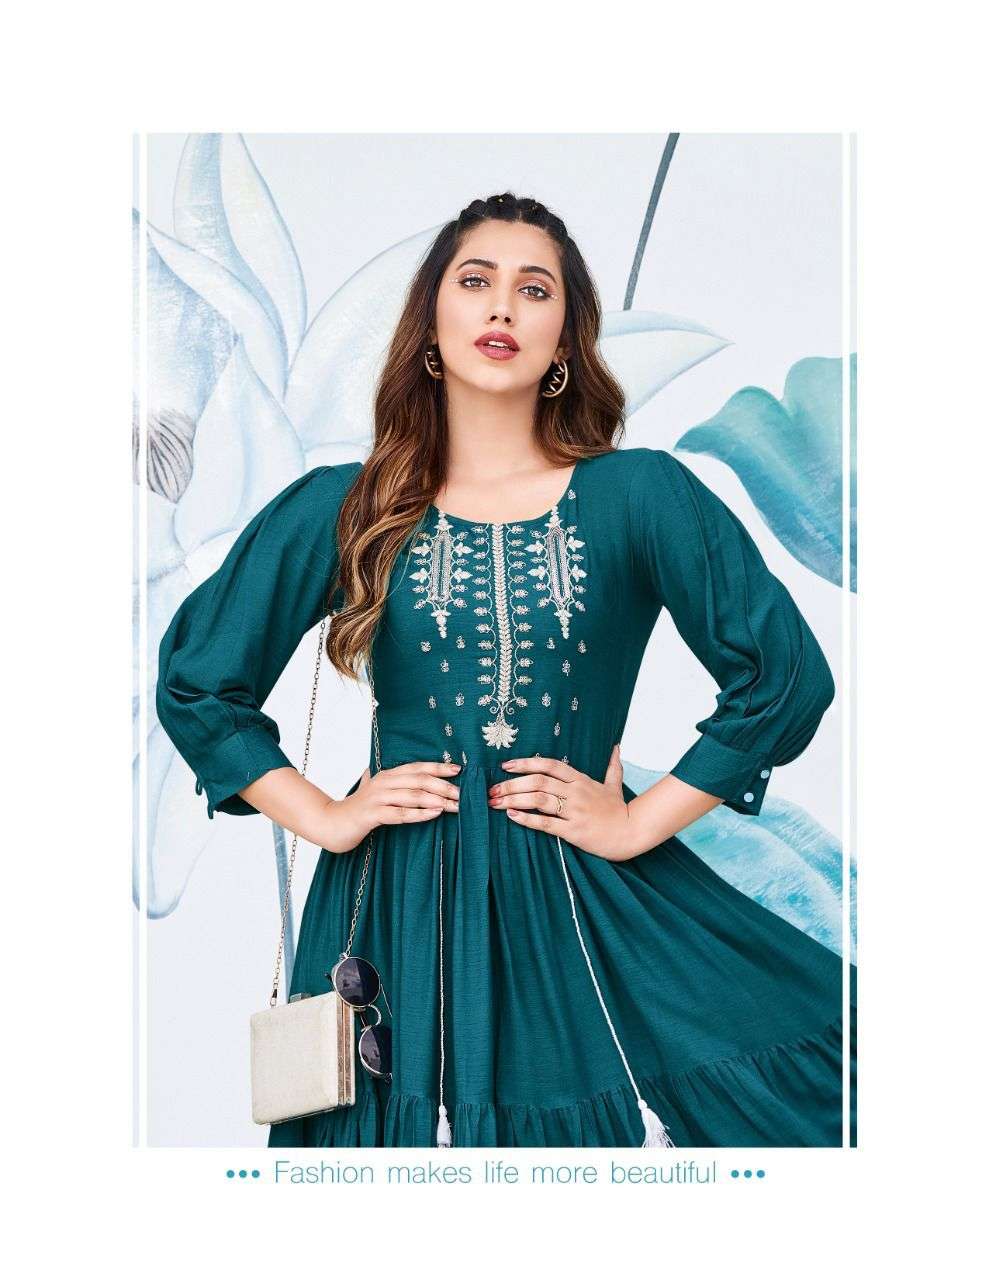 passion tree flair fly vol-11001-1006 reyon wrinkle desiger tunic top collection online price surat 